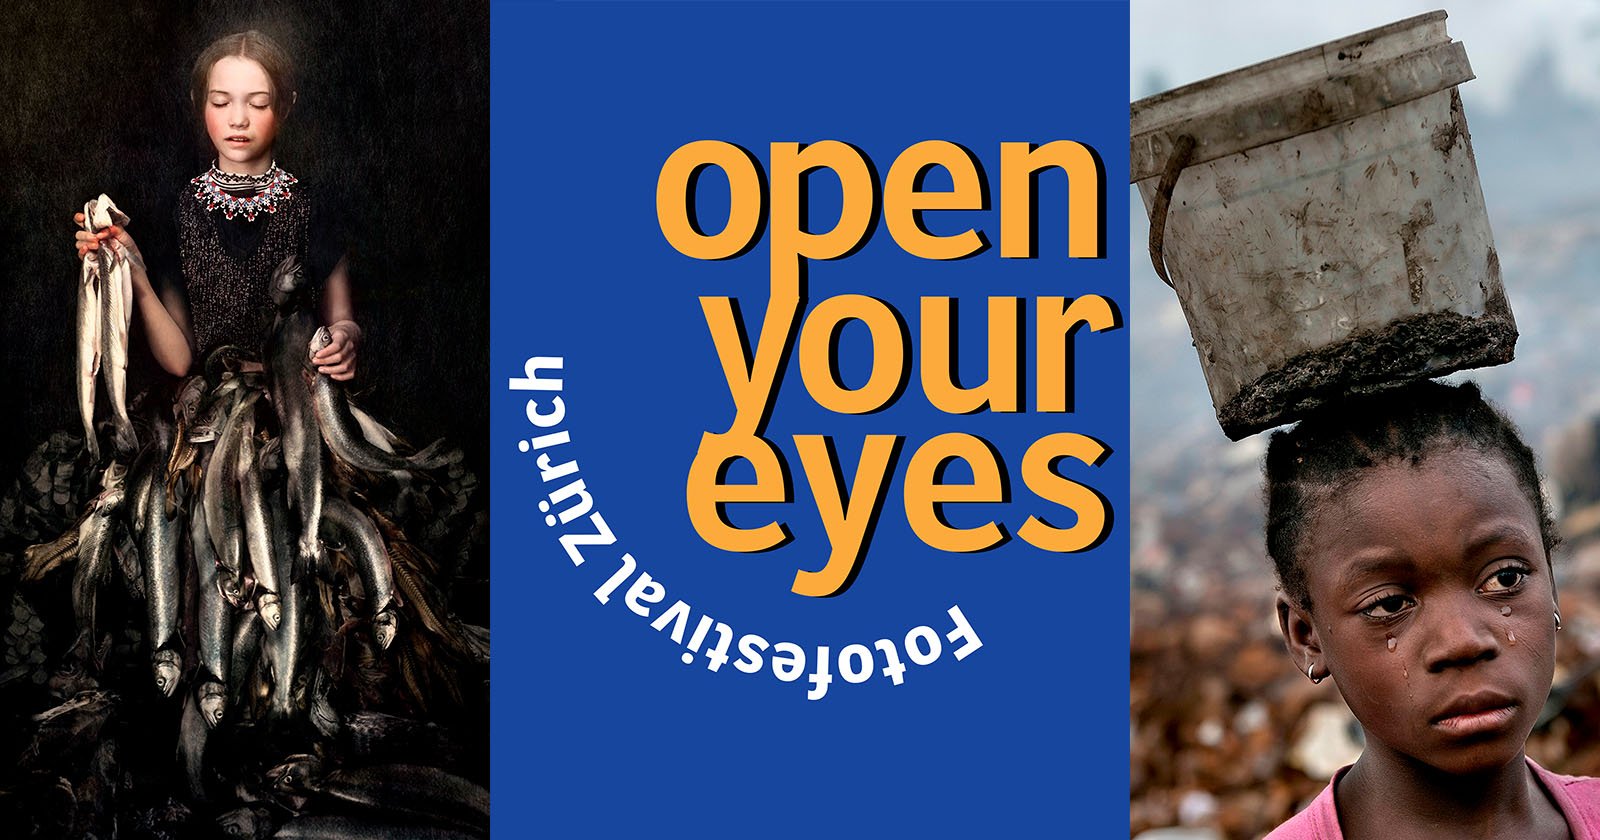  open your eyes fotofestival zurich shines light sustainability 